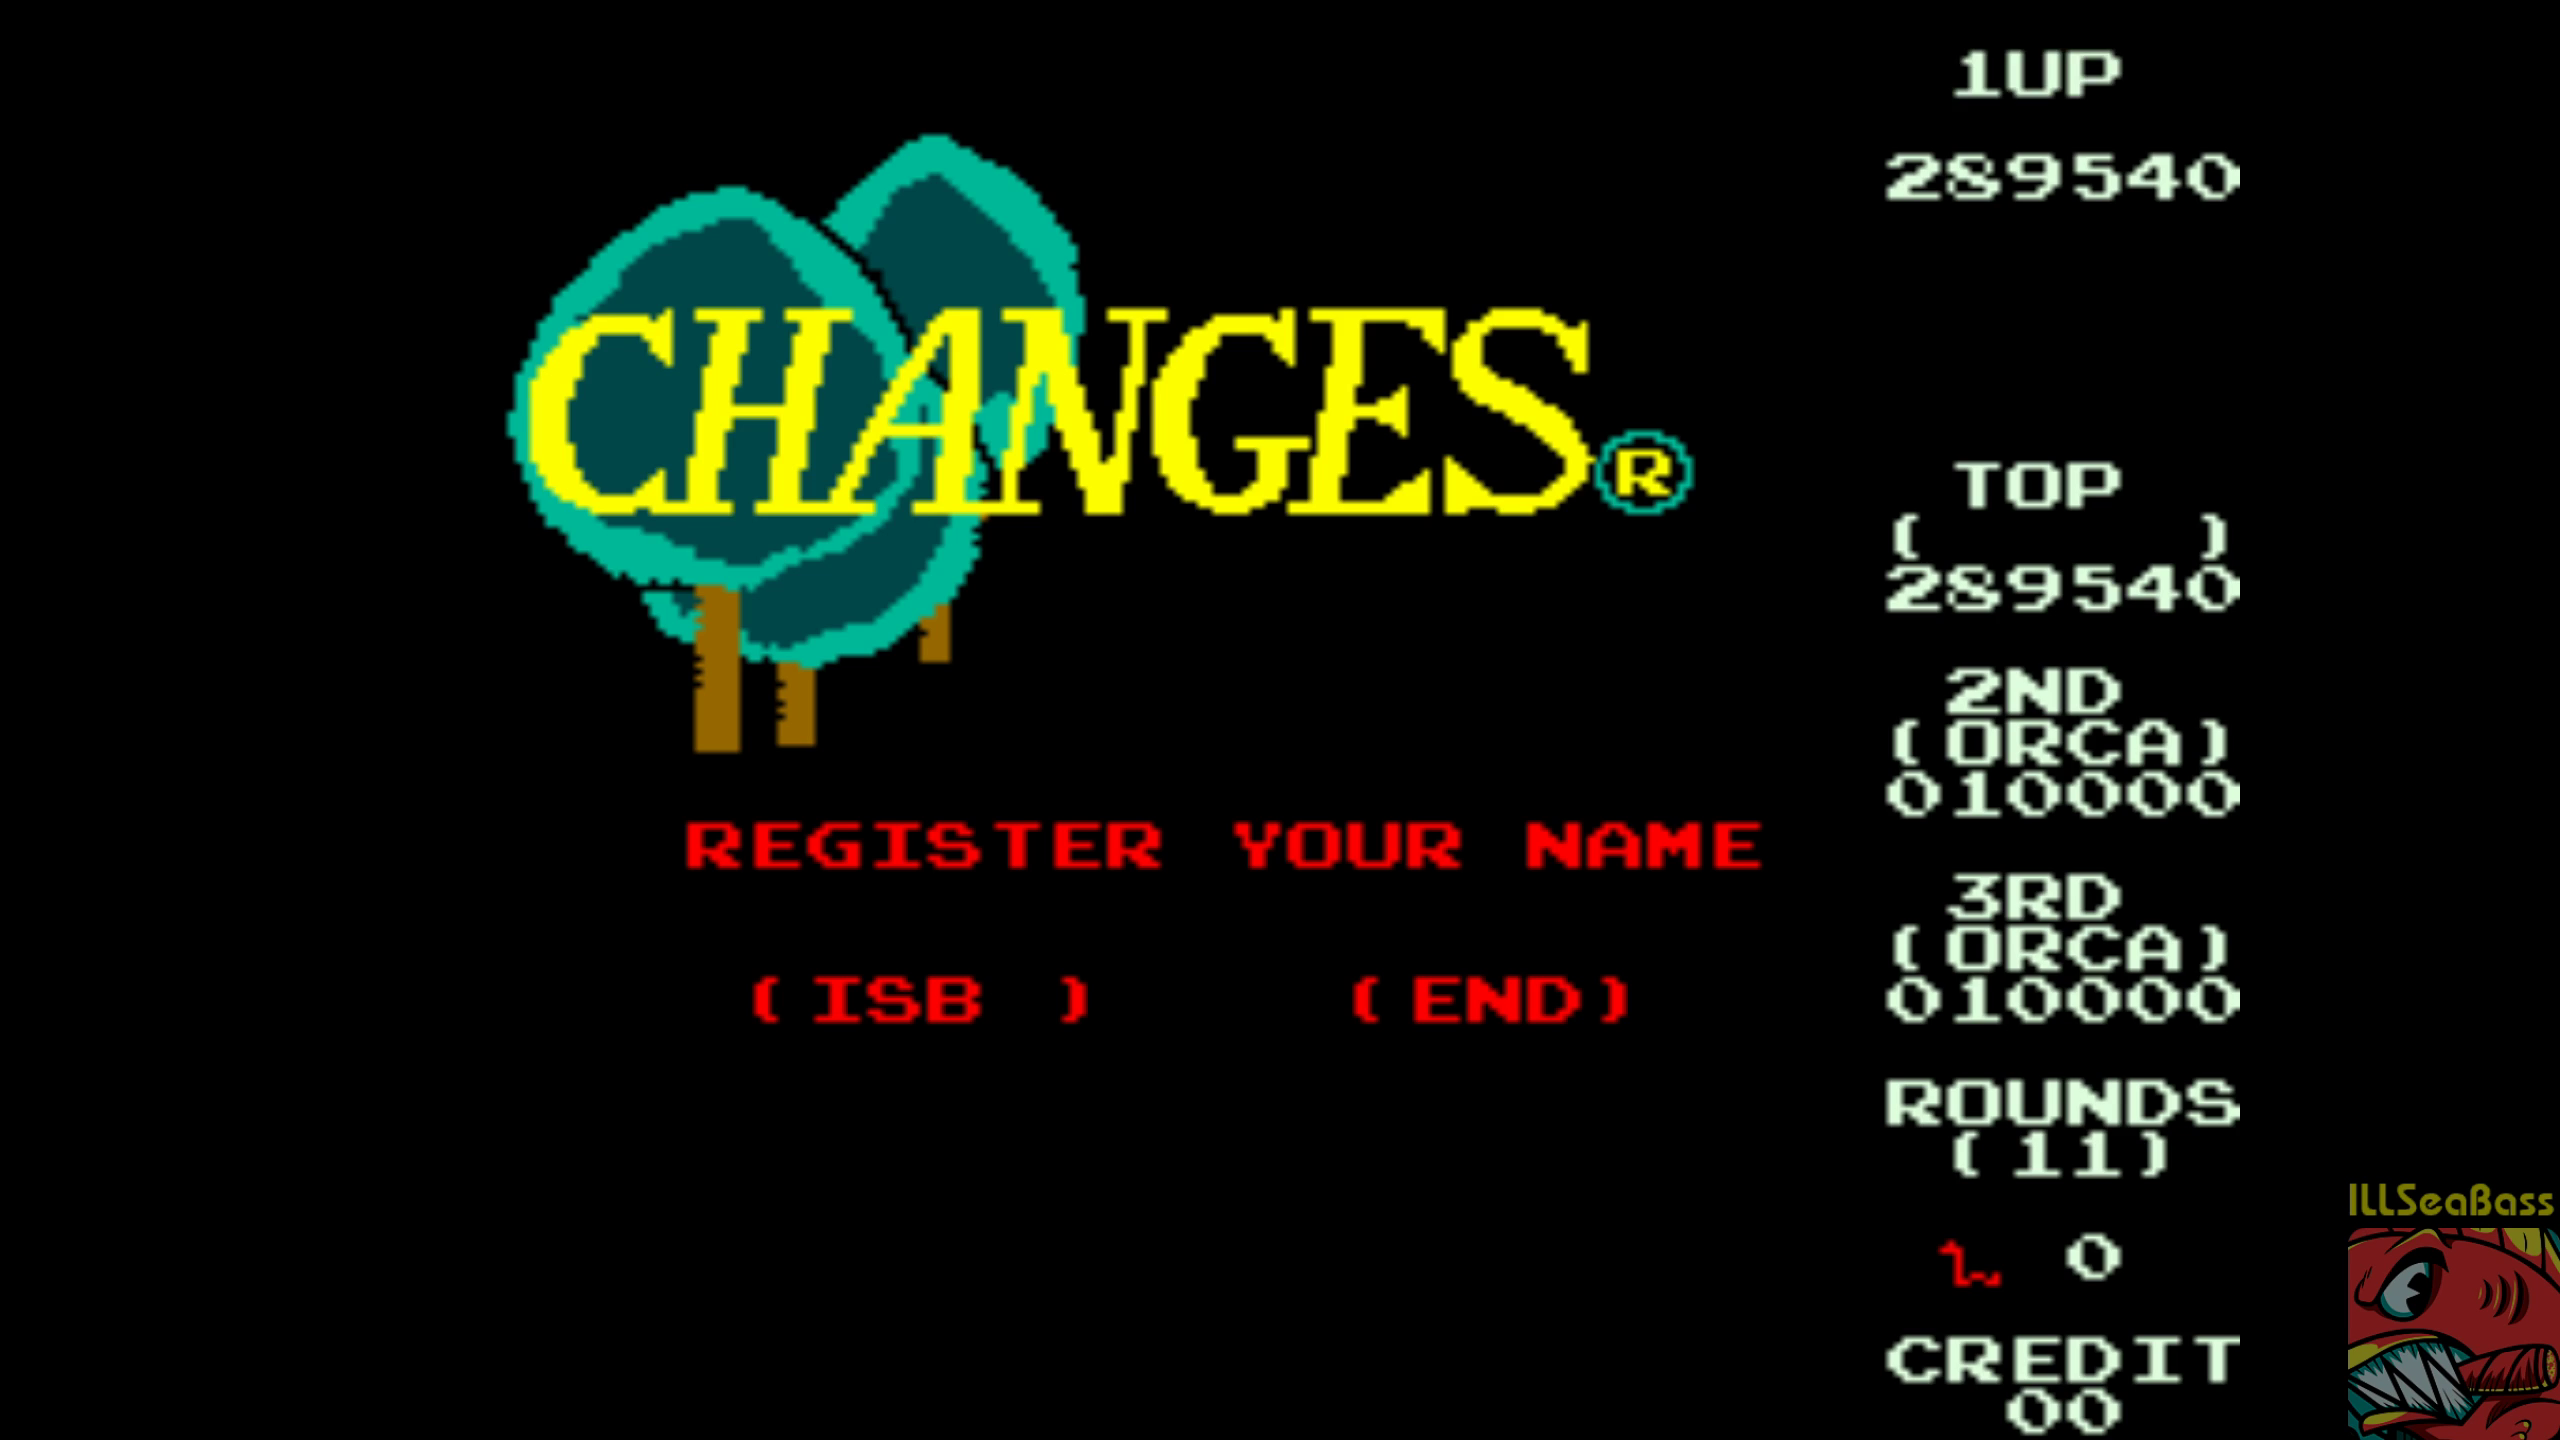 ILLSeaBass: Changes [changes] (Arcade Emulated / M.A.M.E.) 289,540 points on 2019-01-20 00:09:26